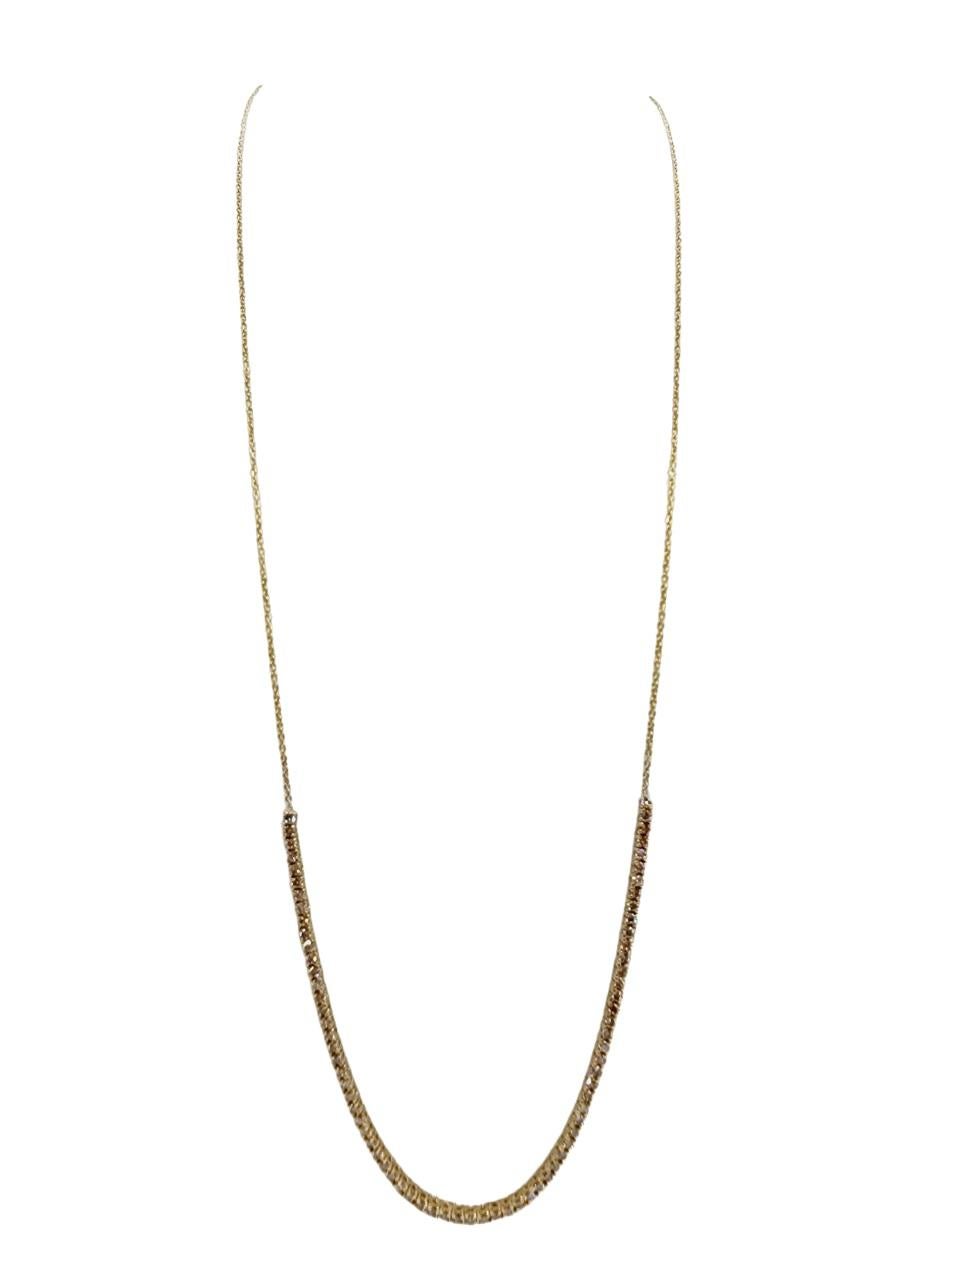 1.65 Carat Mini Diamond Necklace Chain 14 Karat Yellow Gold 20'' In New Condition For Sale In Great Neck, NY